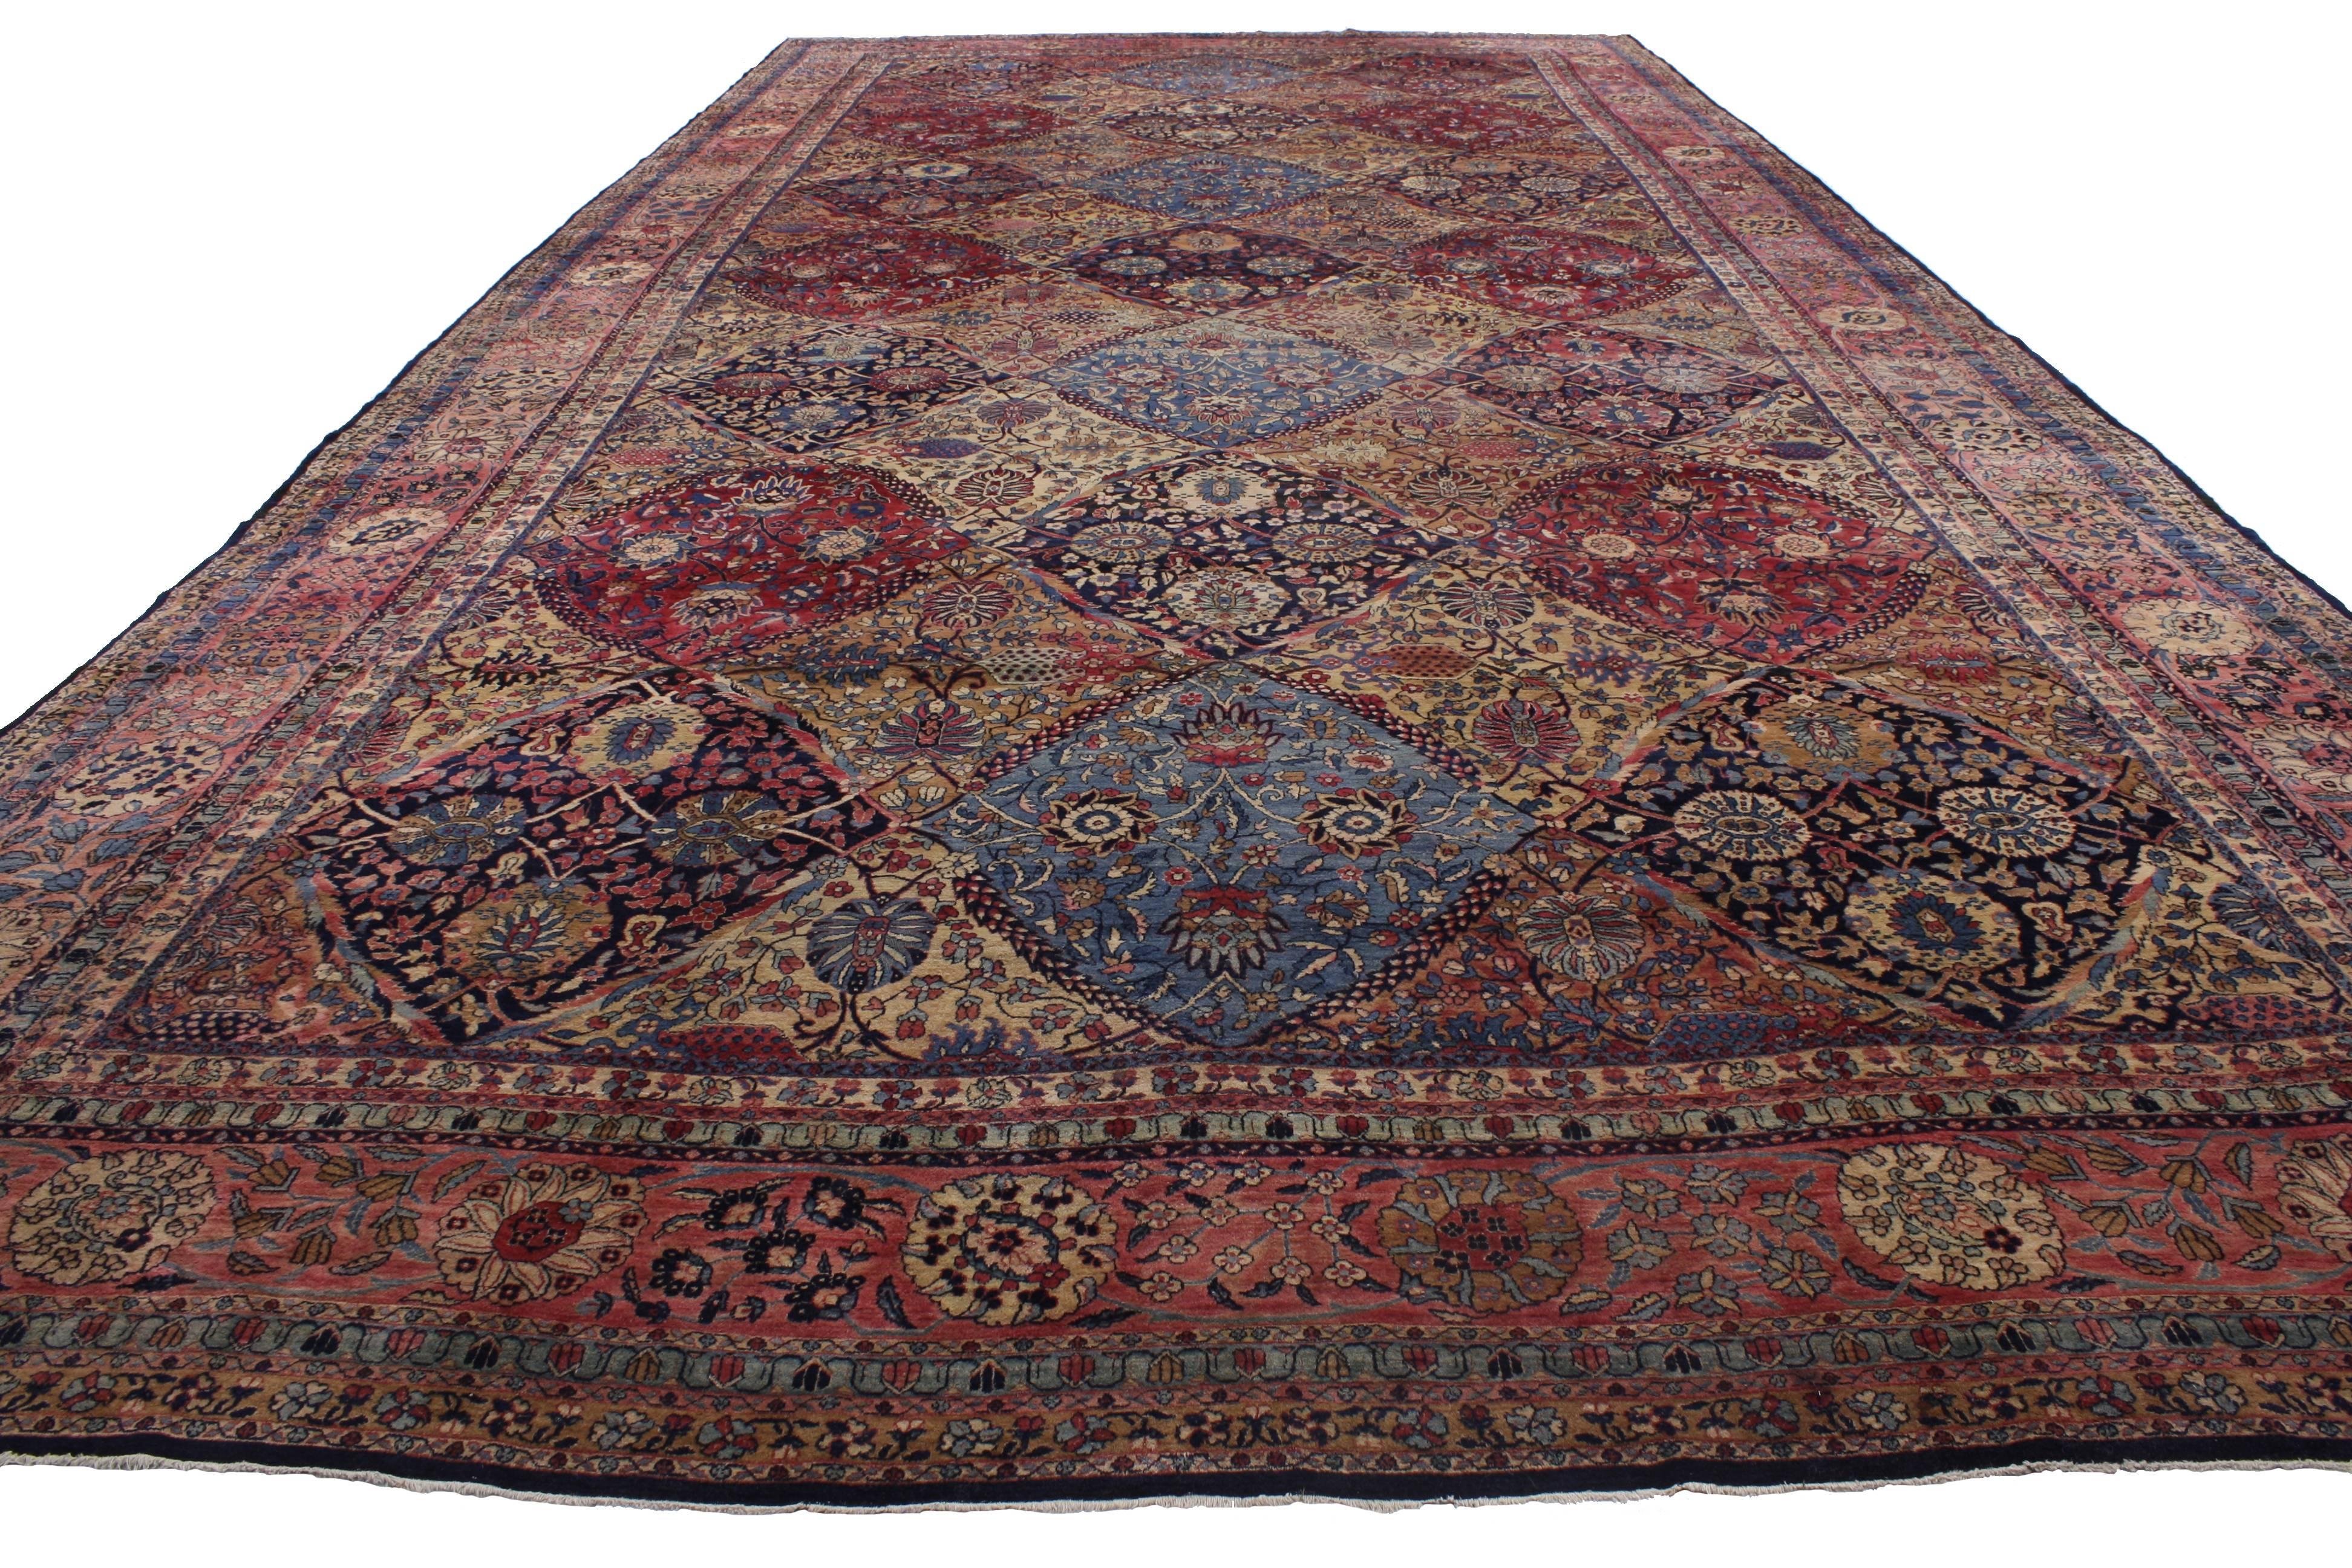 Oversized Antique Persian Kerman Rug, Hotel Lobby Size Carpet In Good Condition For Sale In Dallas, TX